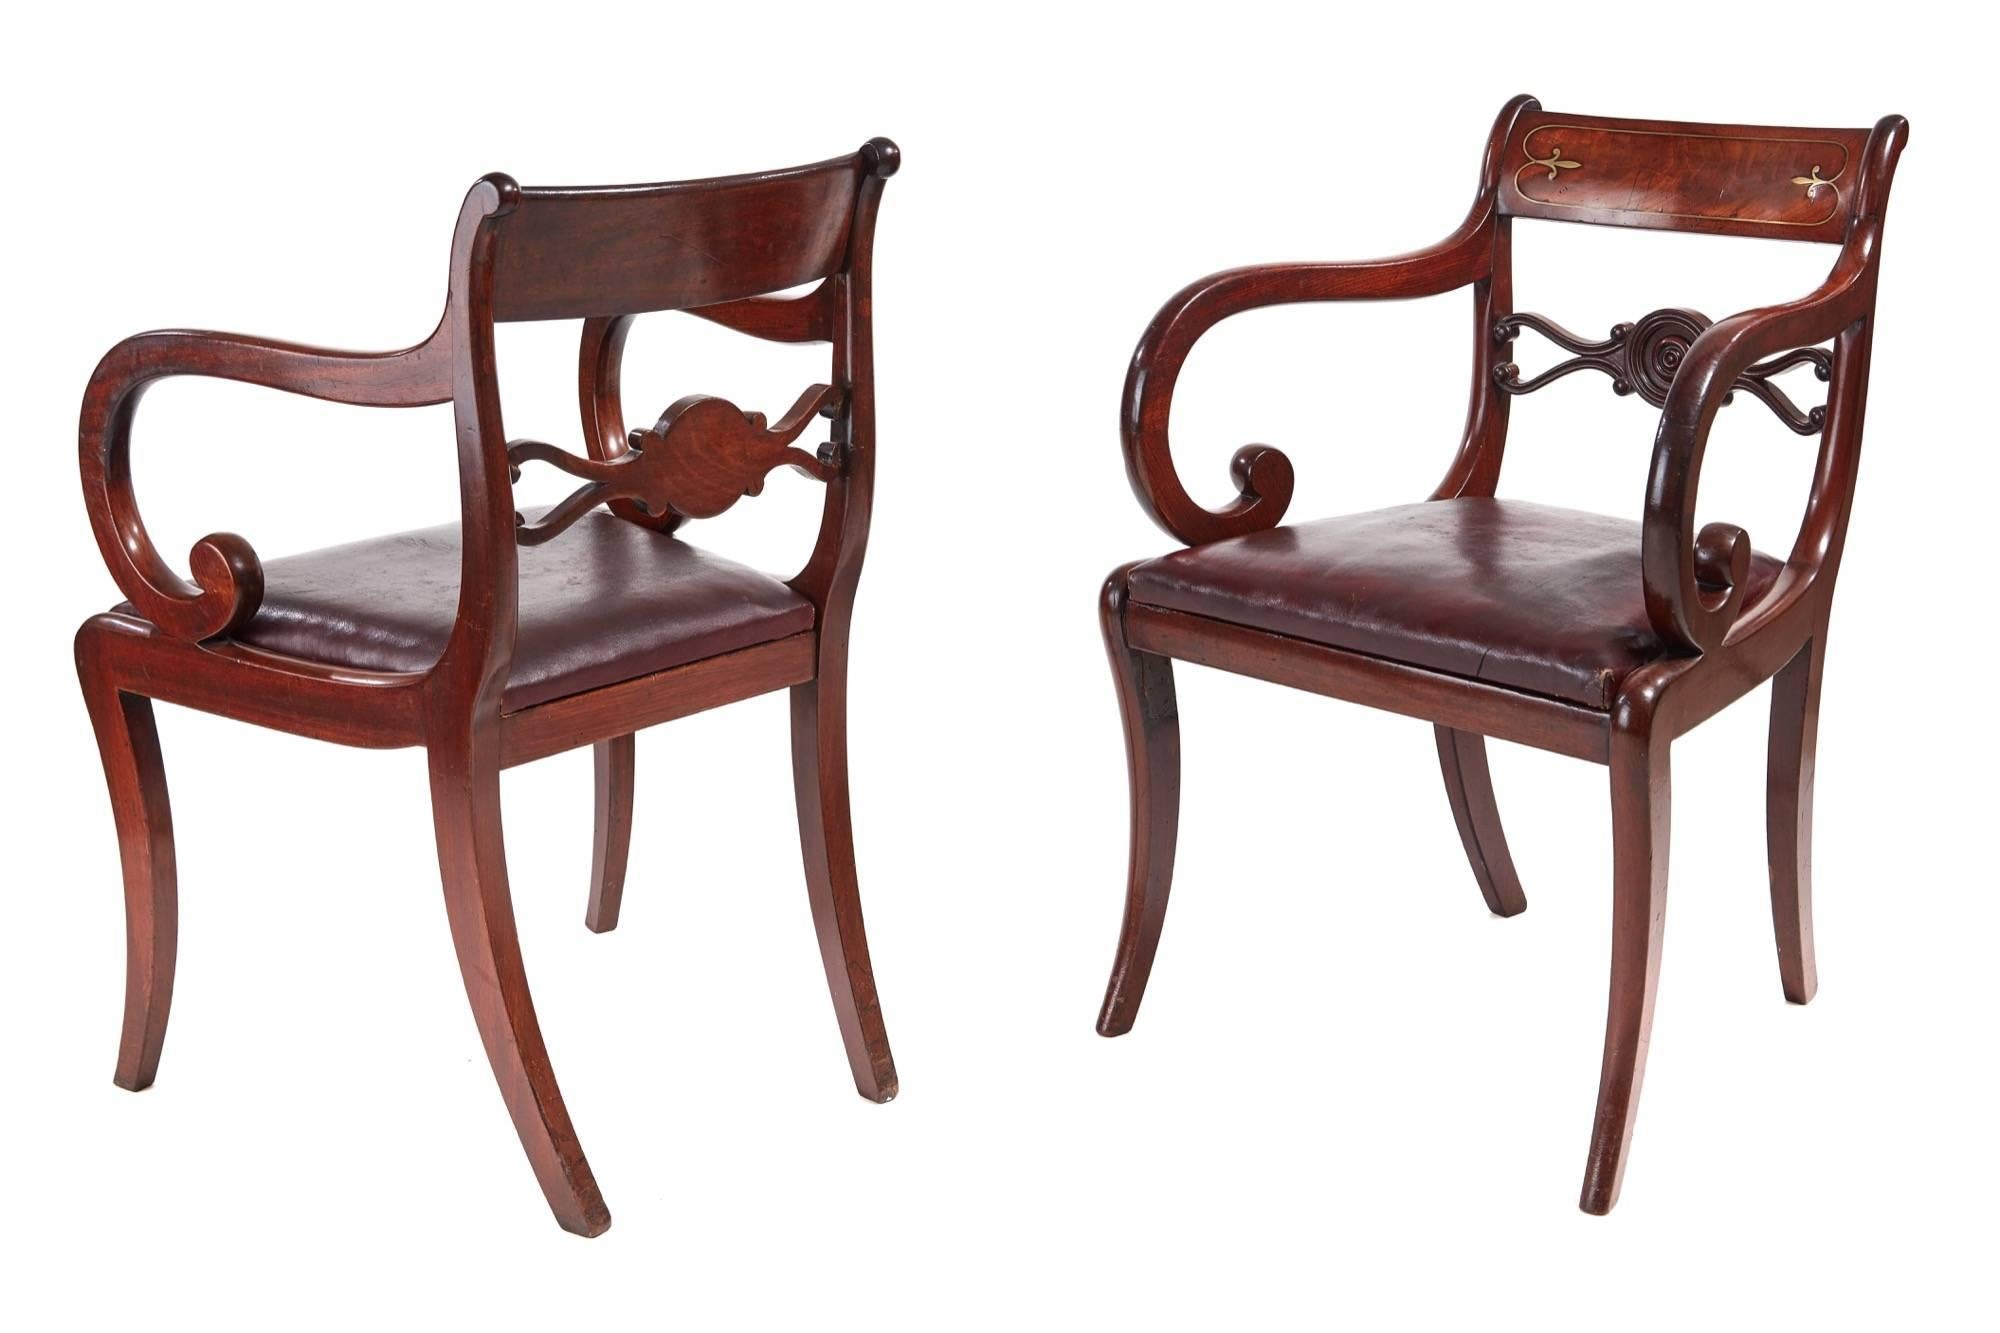 Fine pair of Regency mahogany brass inlaid elbow chairs, with a shaped brass inlaid top rail, shaped and carved centre splat, scroll shaped arms, drop in seat, standing on sabre legs
Lovely original color, one old repair to front leg.